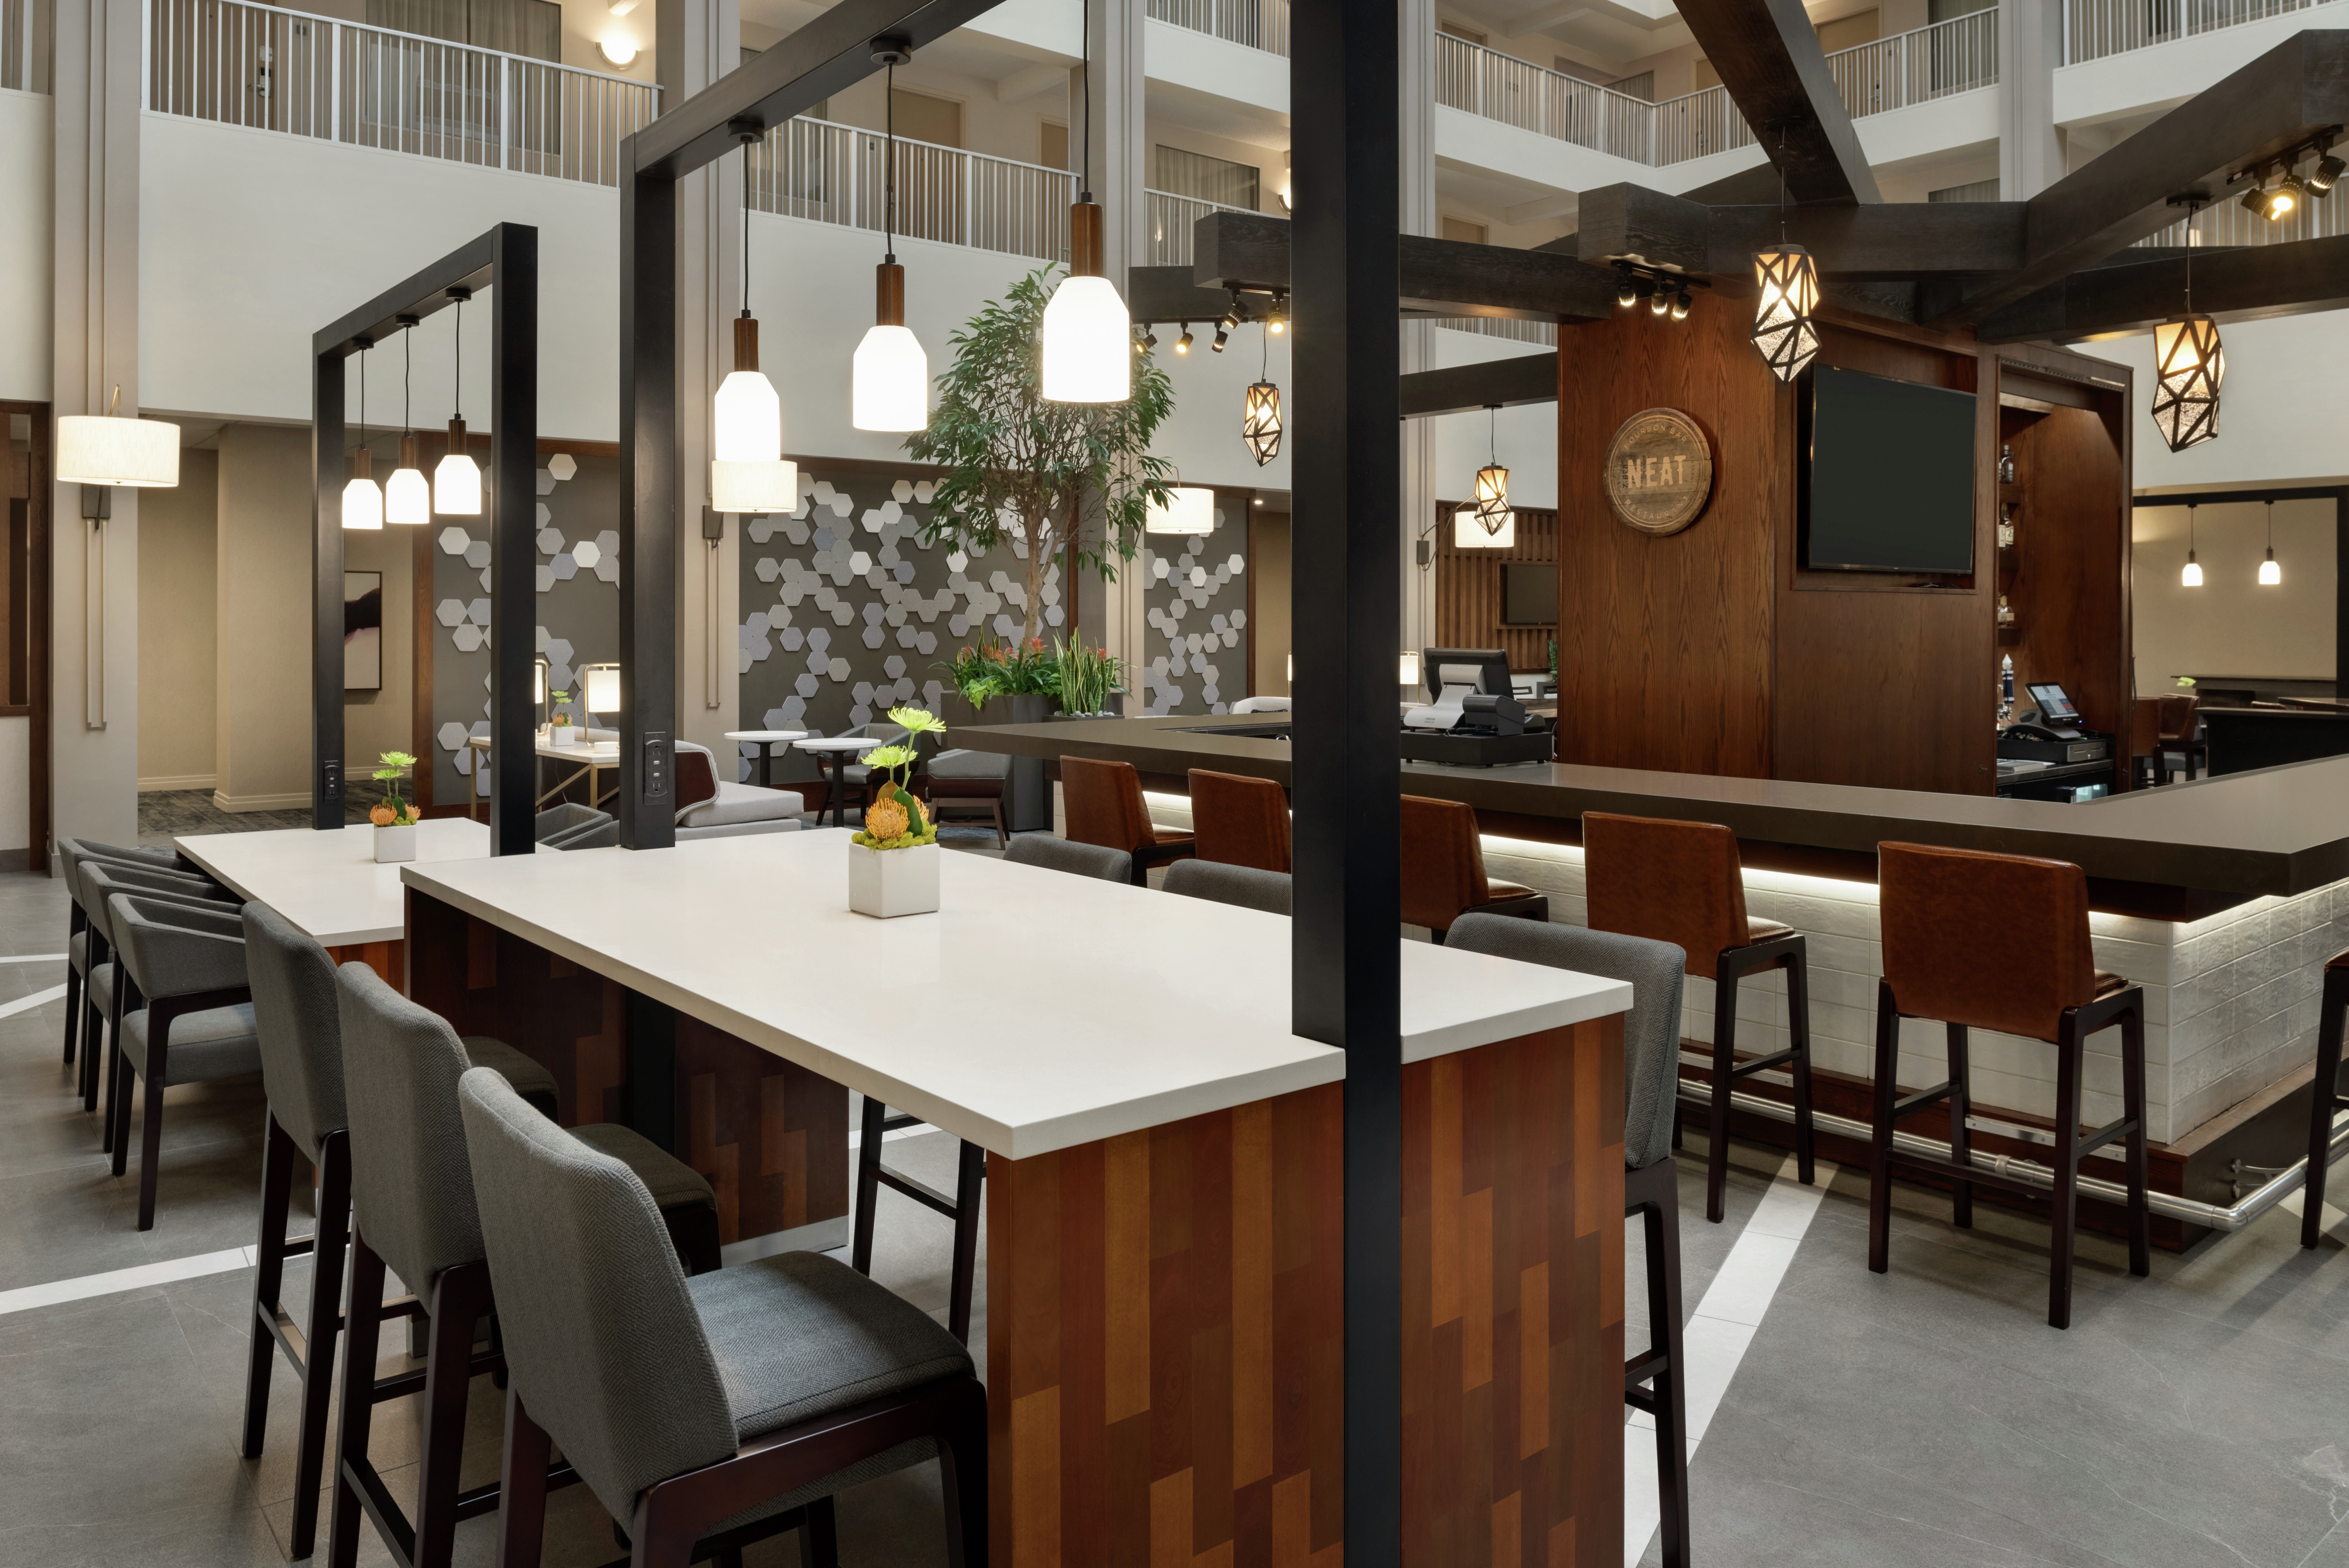 The Atrium Café & Bar with Tables, Chairs, and Room Technology